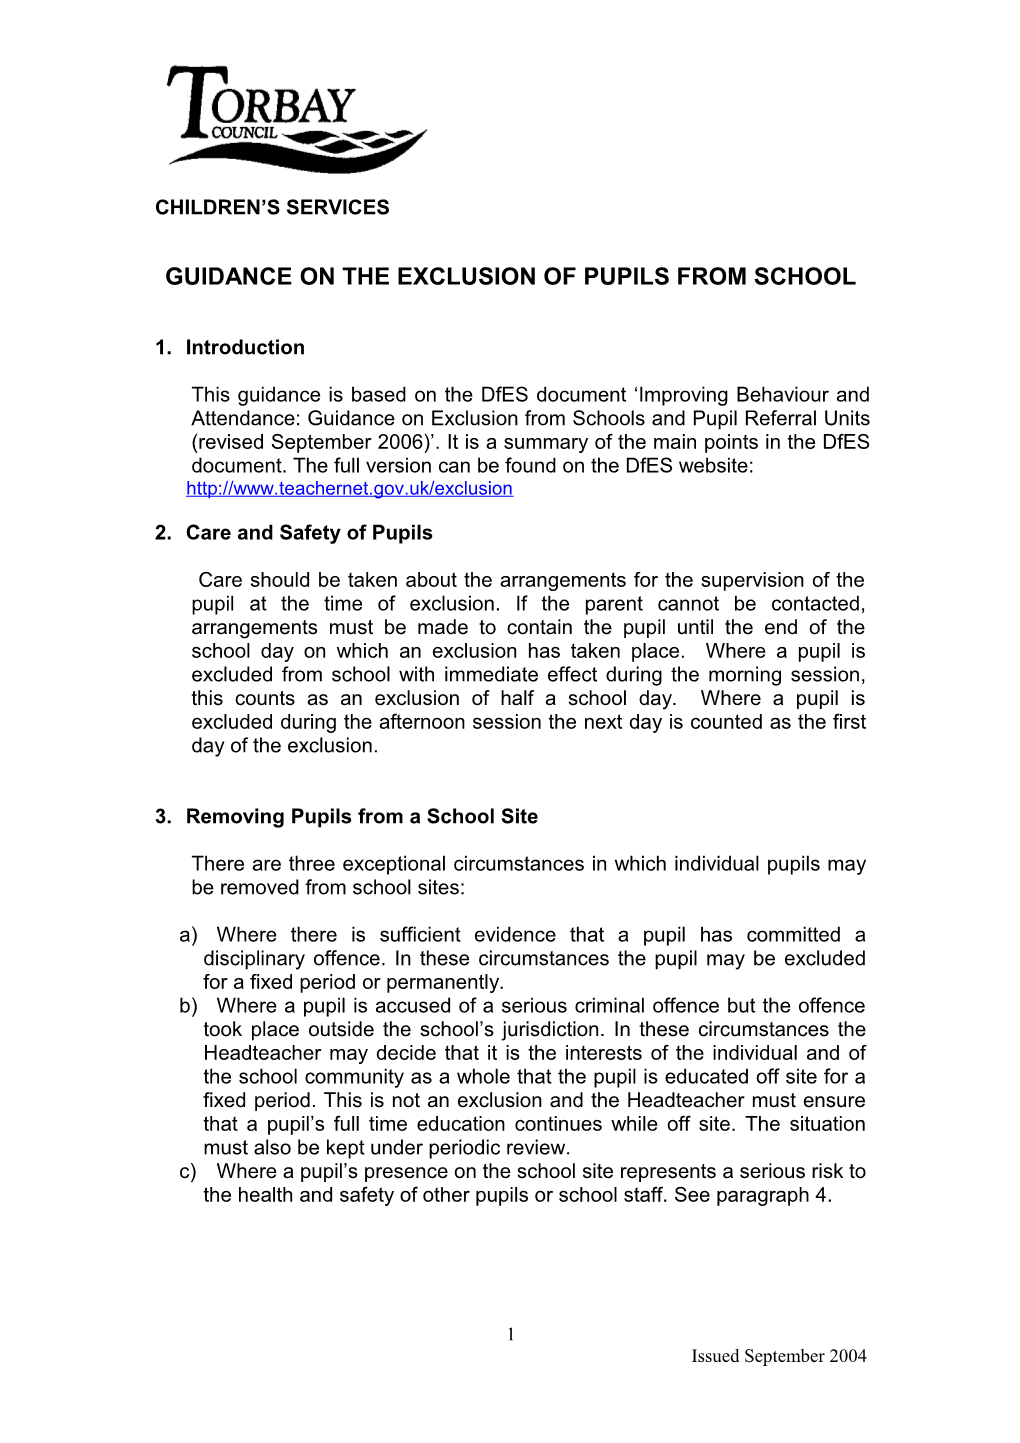 Procedure for the Exclusion of Pupils